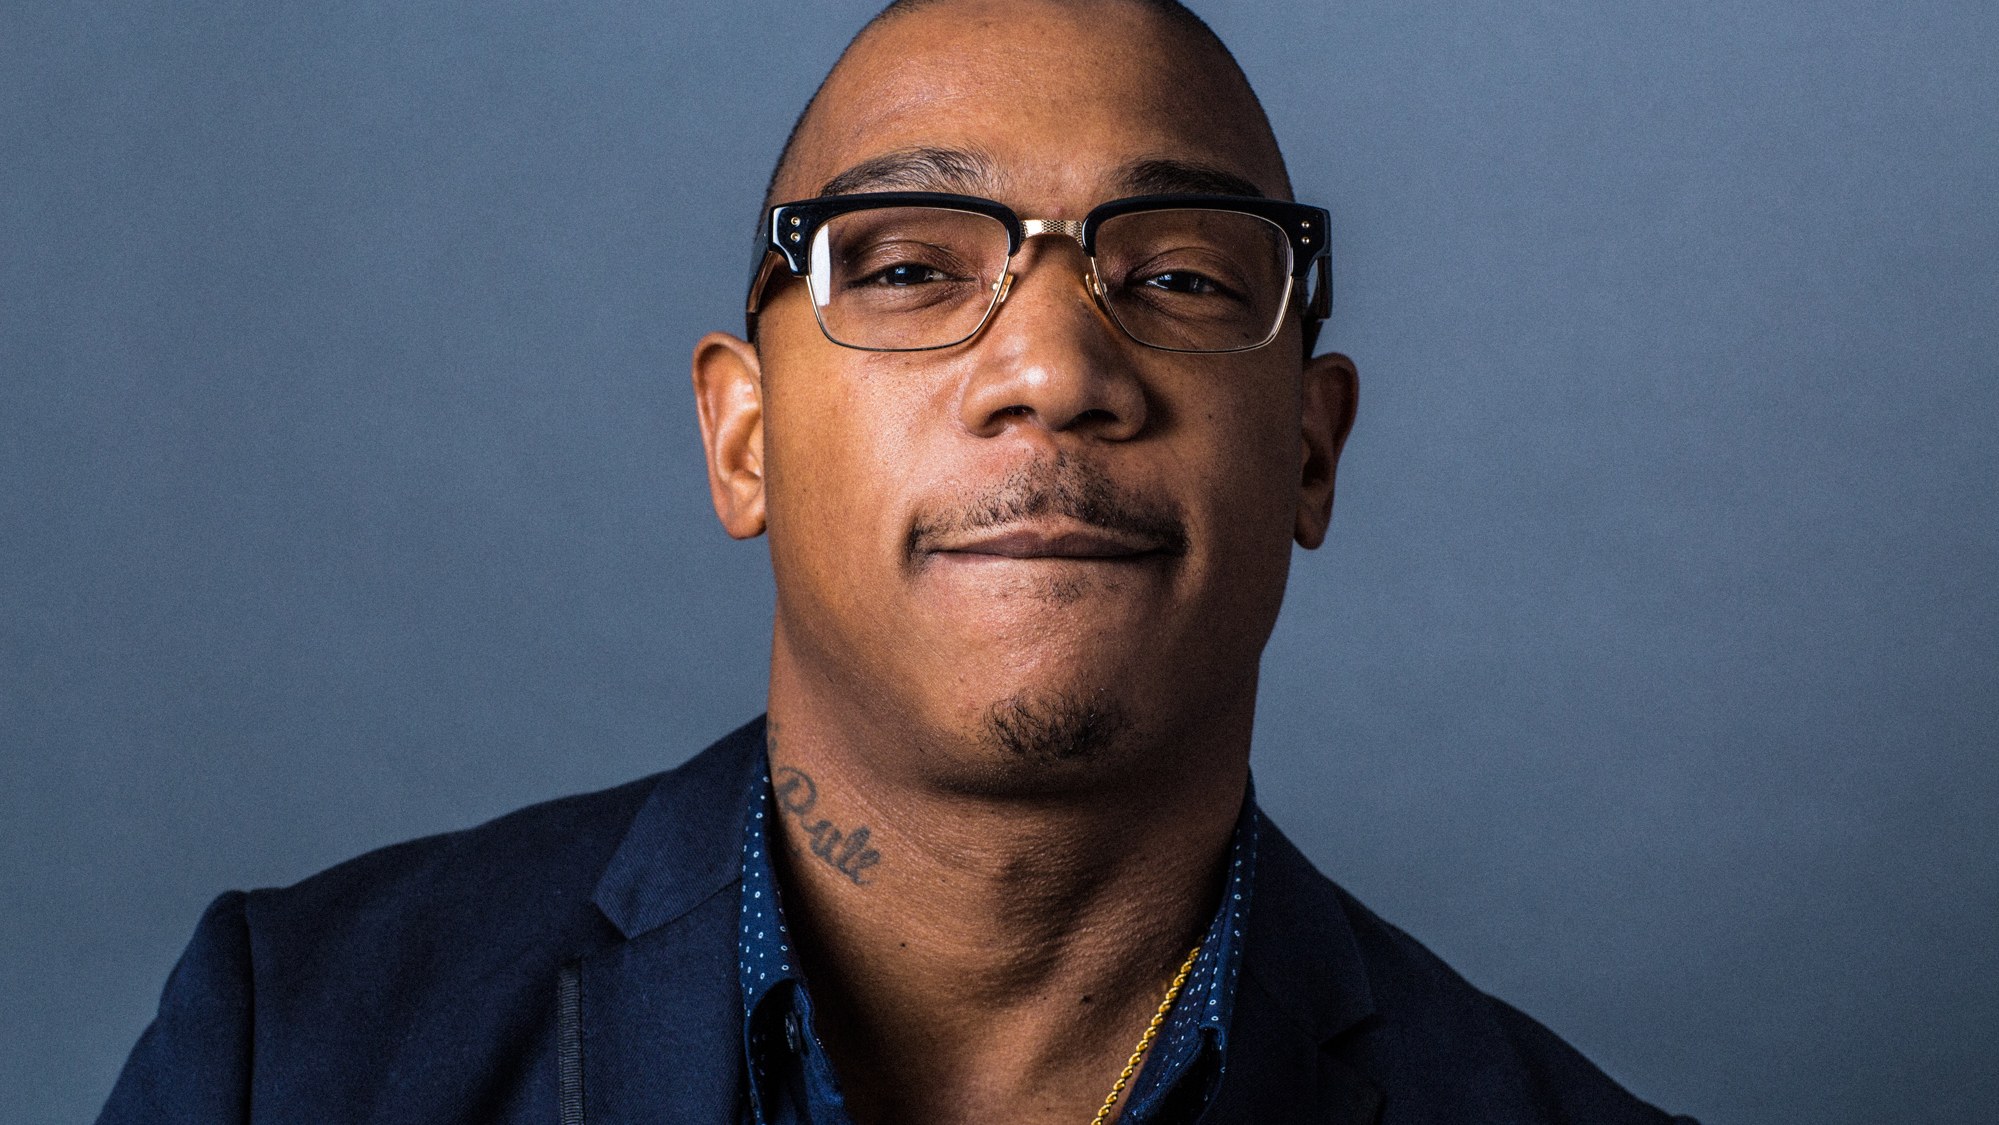 Pictures of Ja Rule - Pictures Of Celebrities